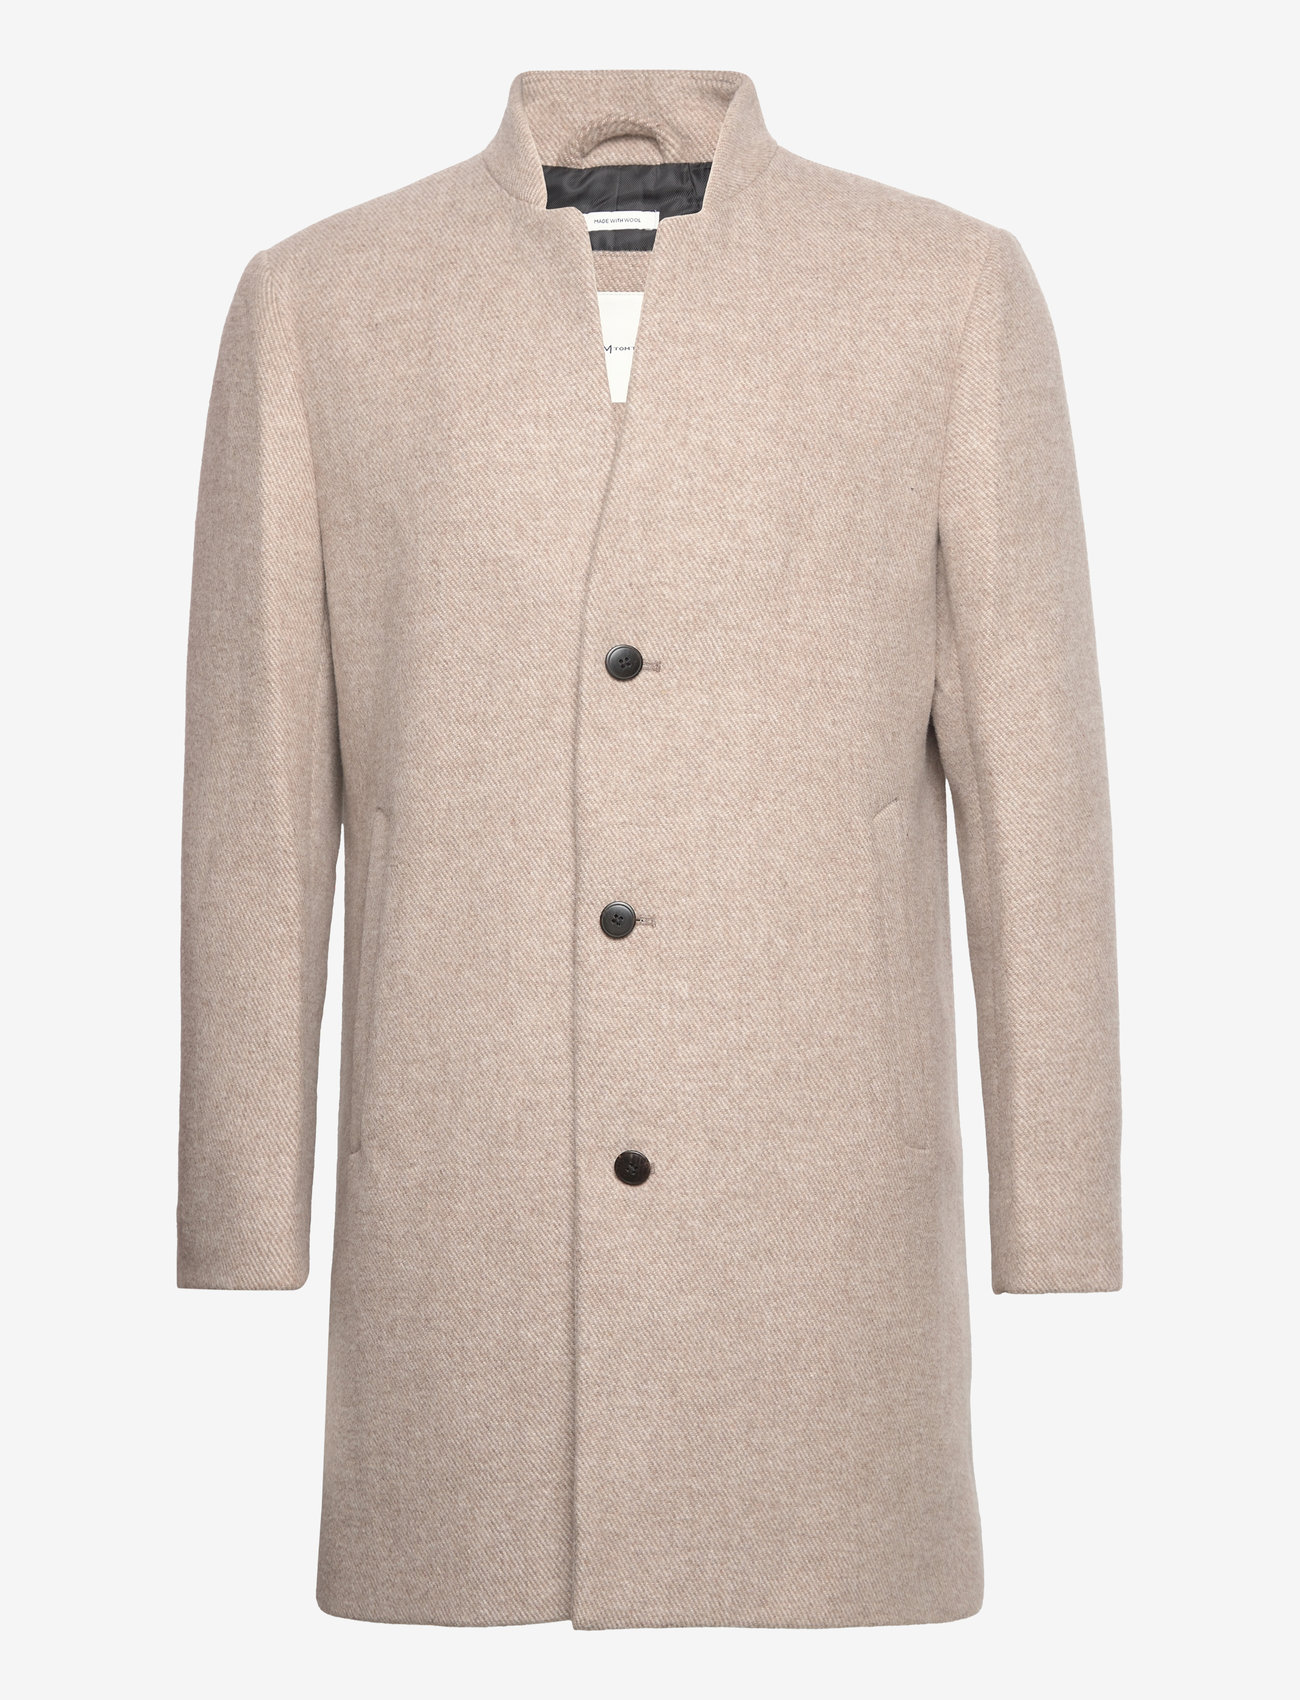 Tom Tailor - three button wool coat - winter jackets - sand off white twill structure - 0